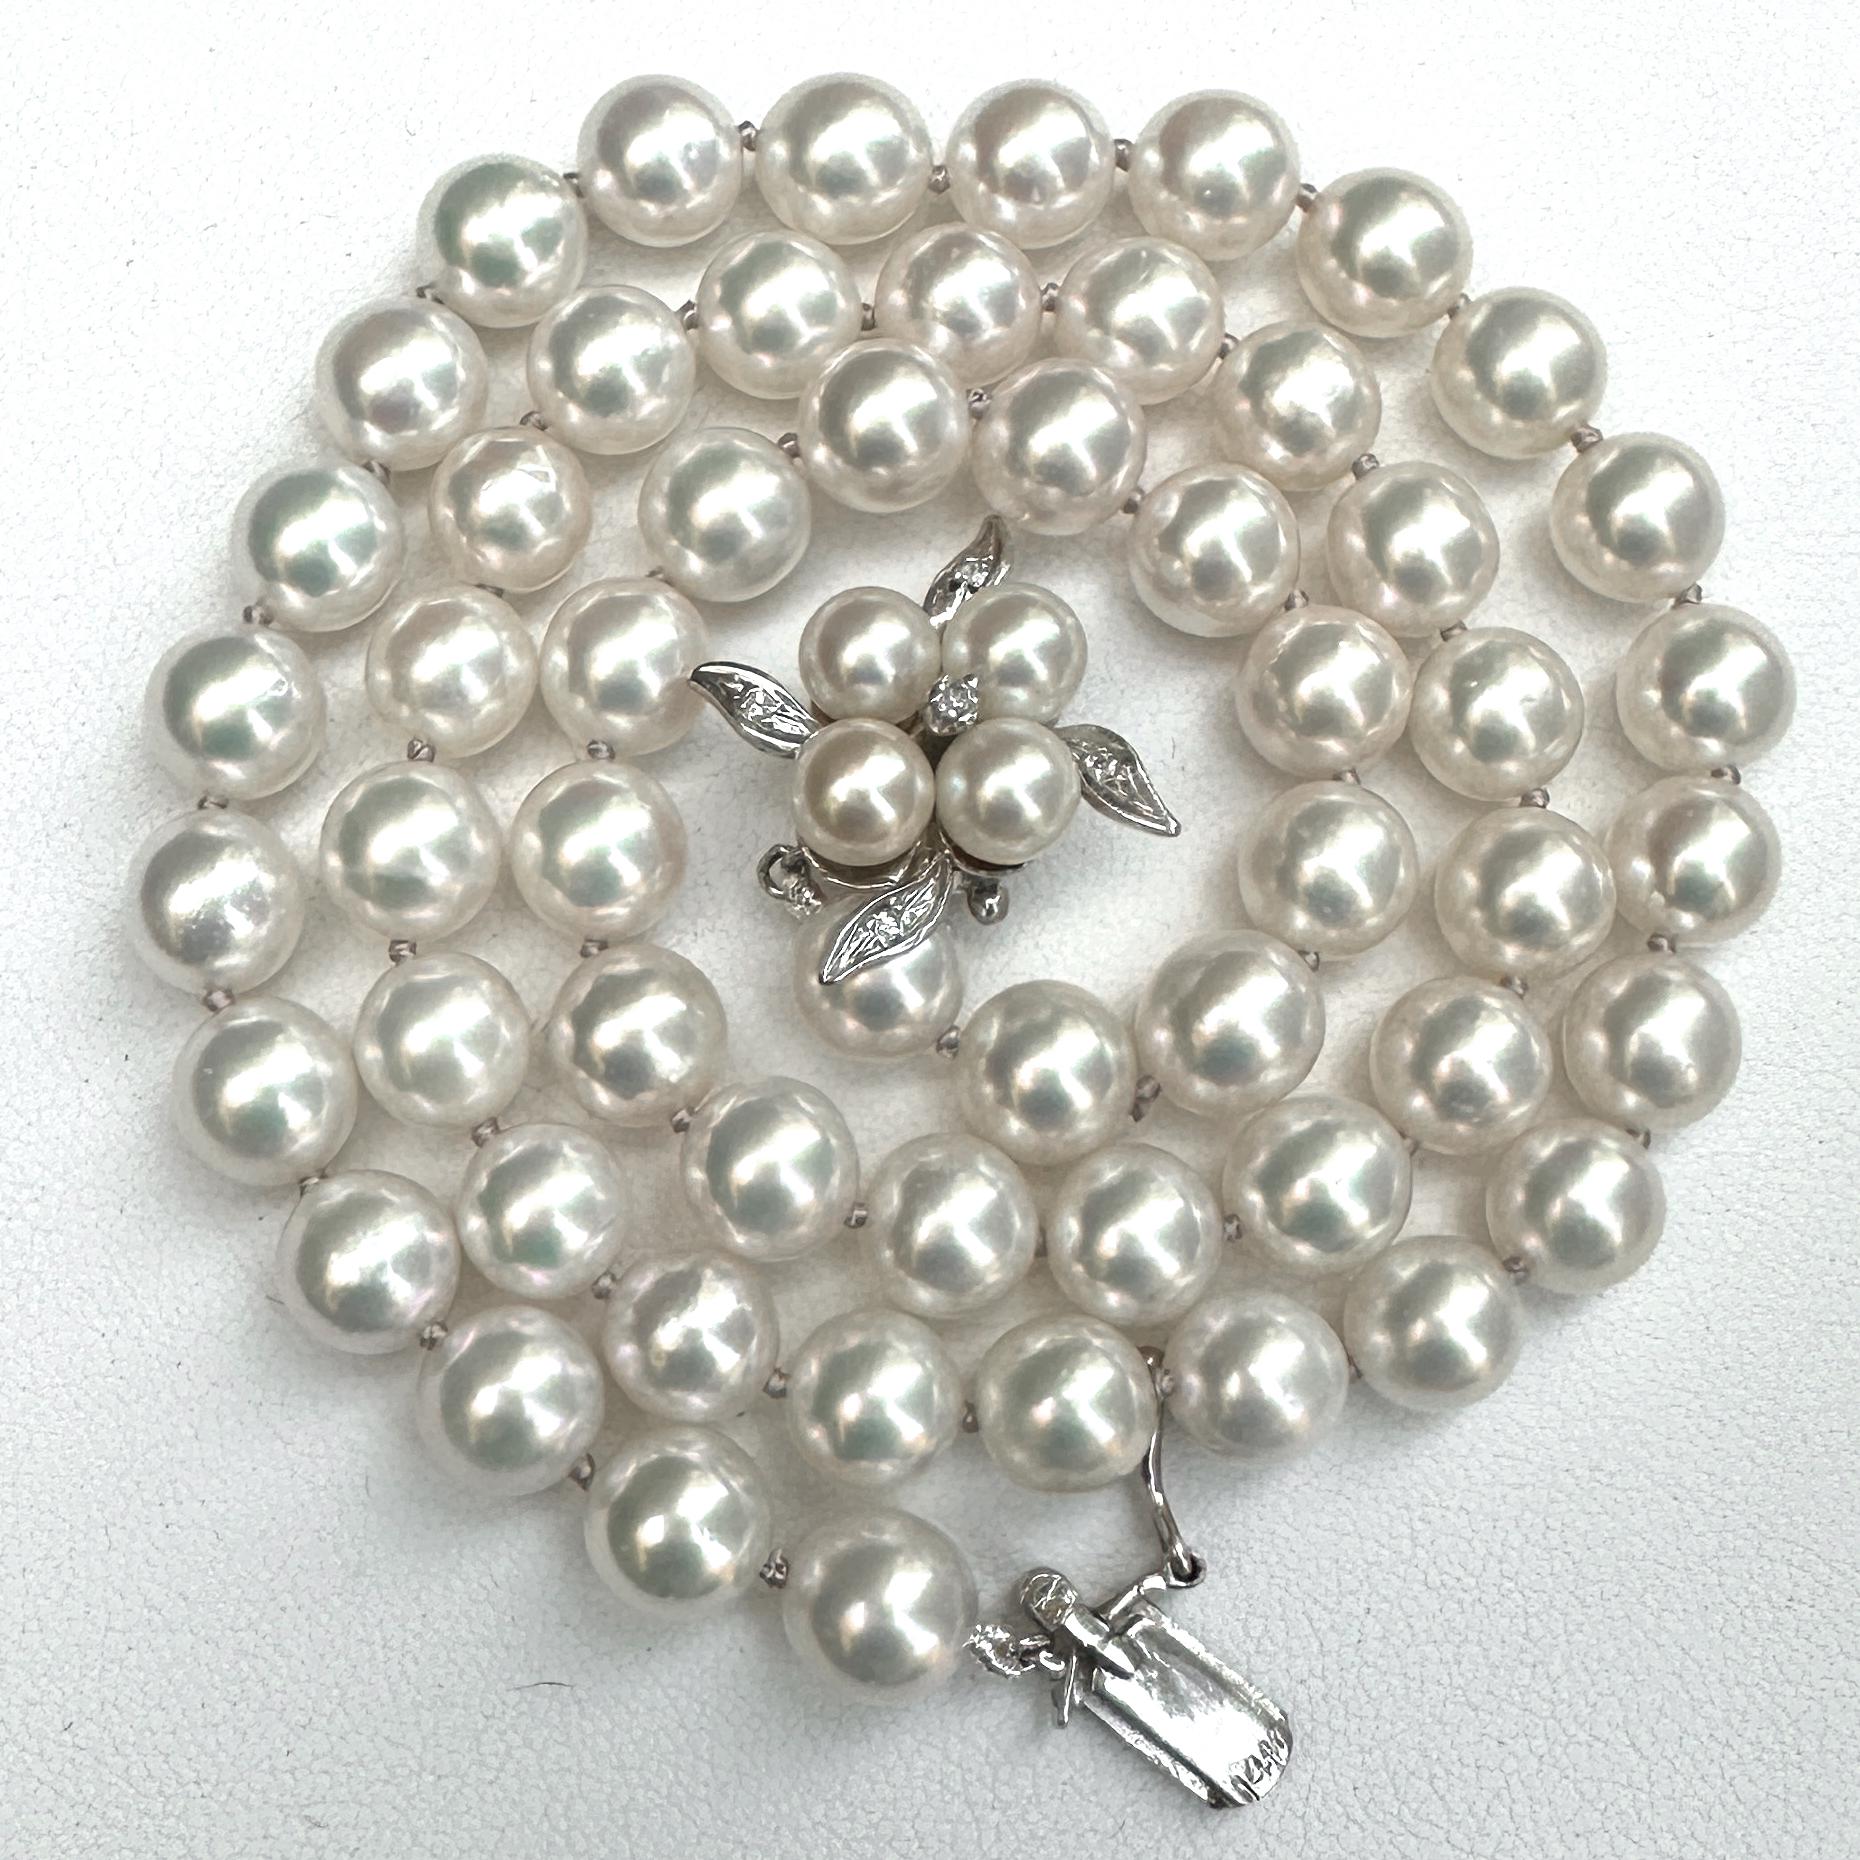 Princess Length 7mm Akoya Pearl Necklace with Vintage White Gold & Diamond Clasp In New Condition For Sale In Sherman Oaks, CA